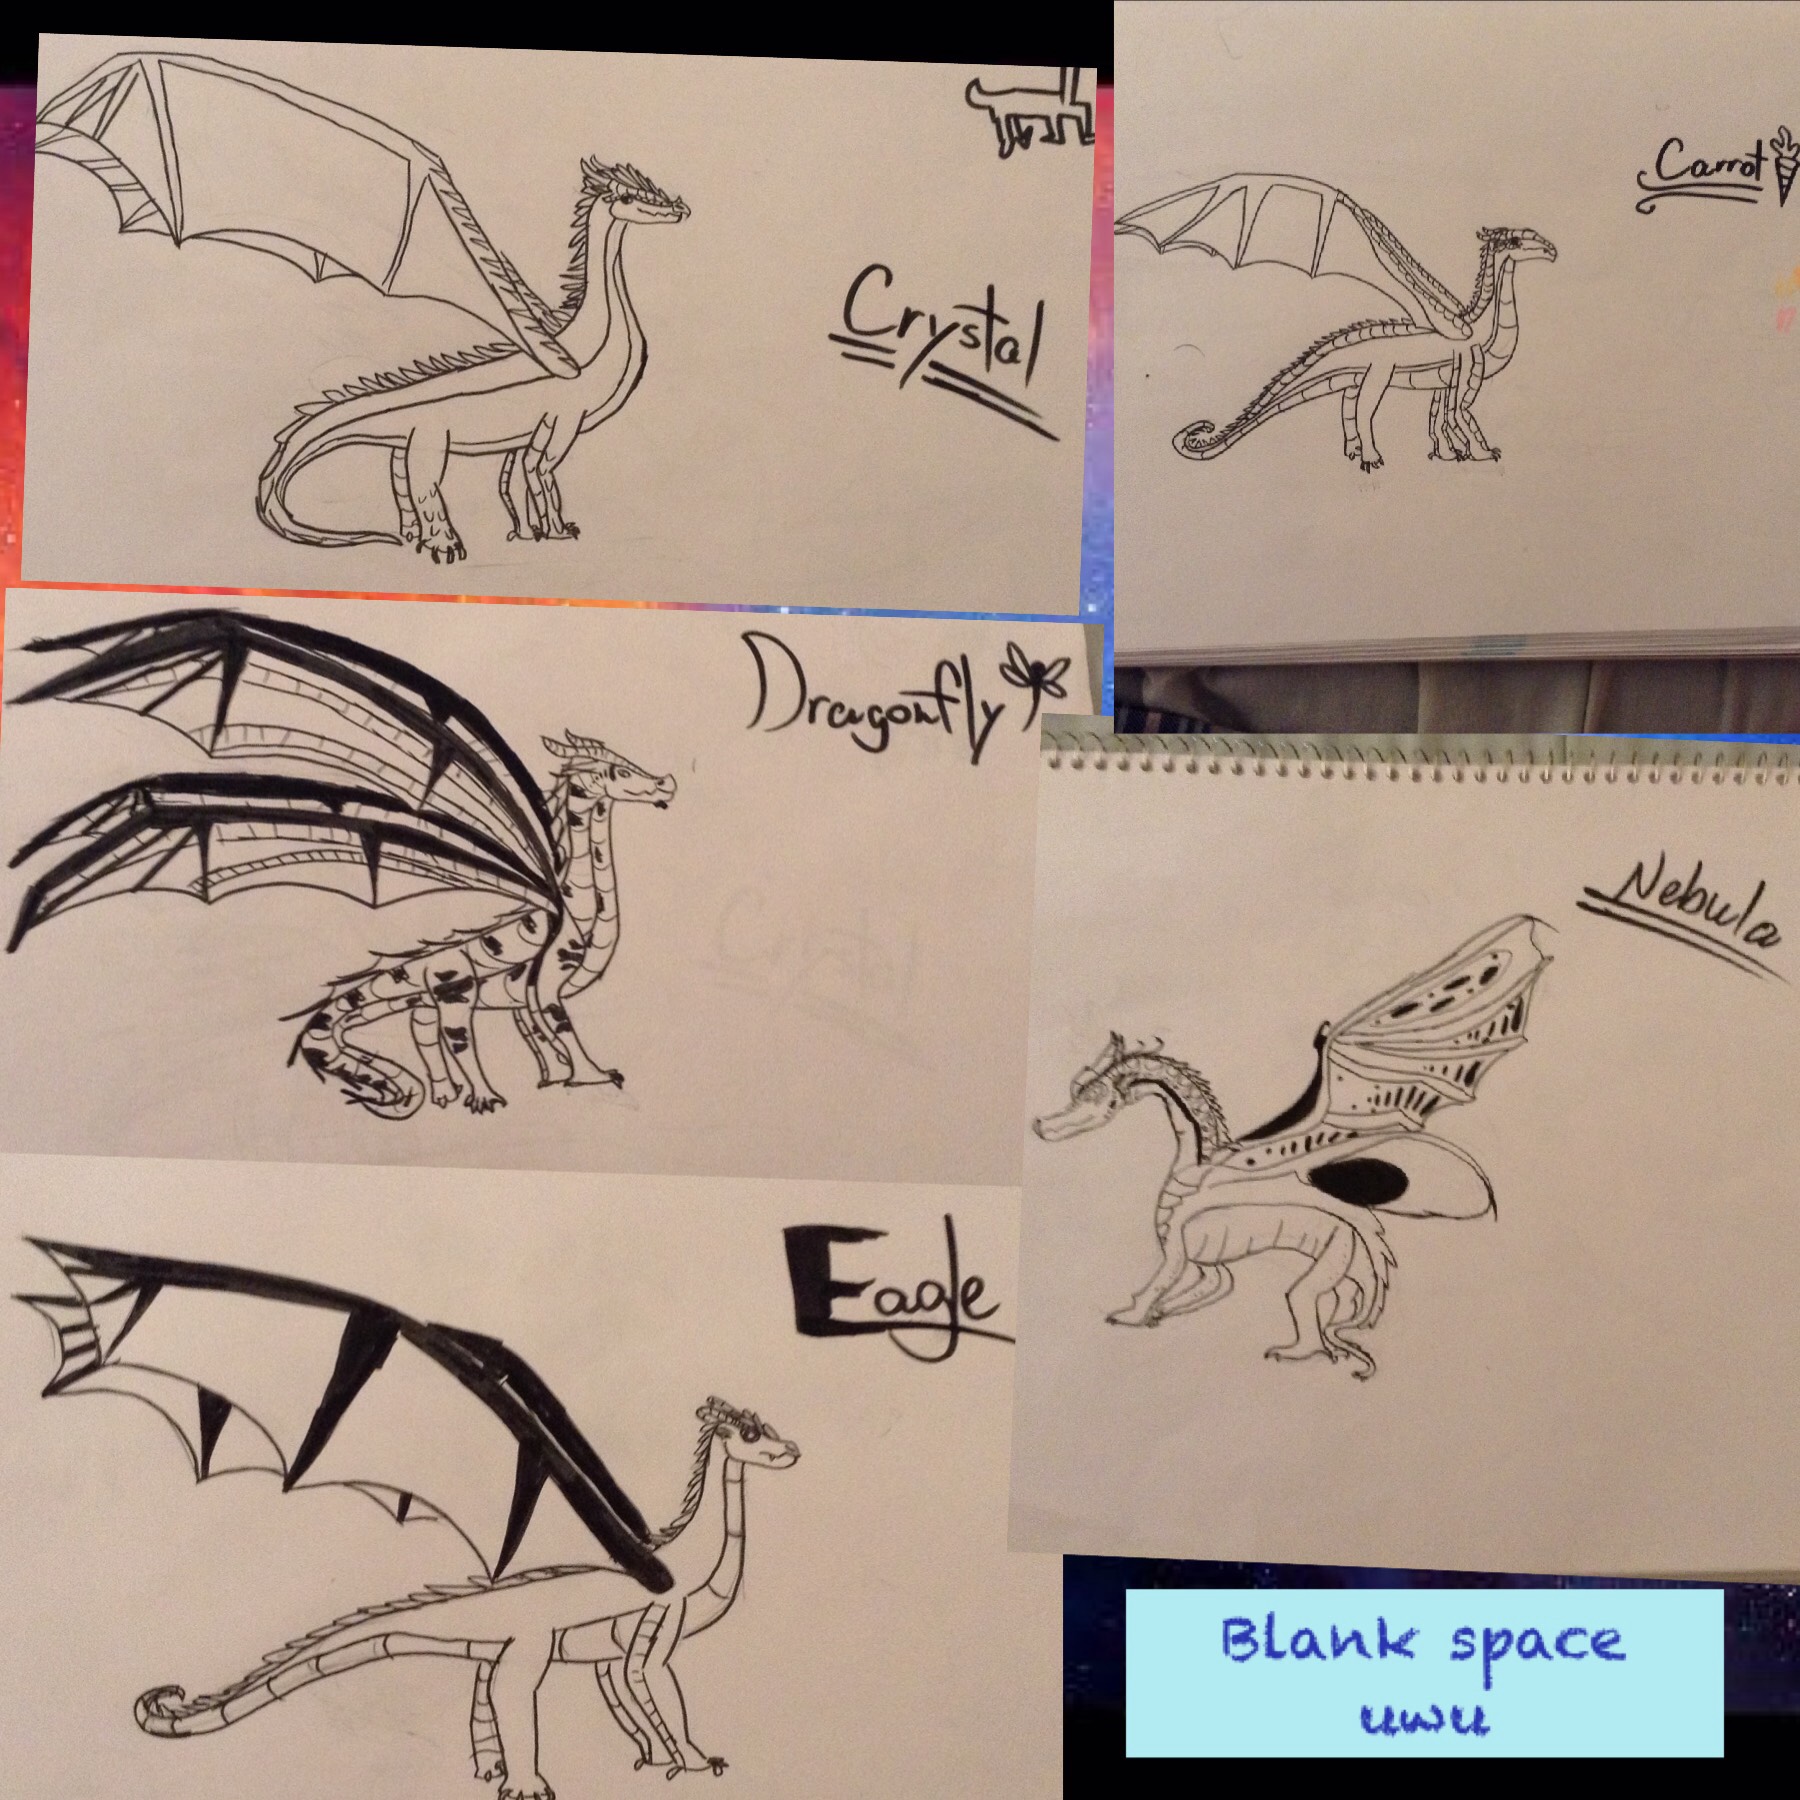 These are some wings of fire fan arts I drew, description of each in comments.